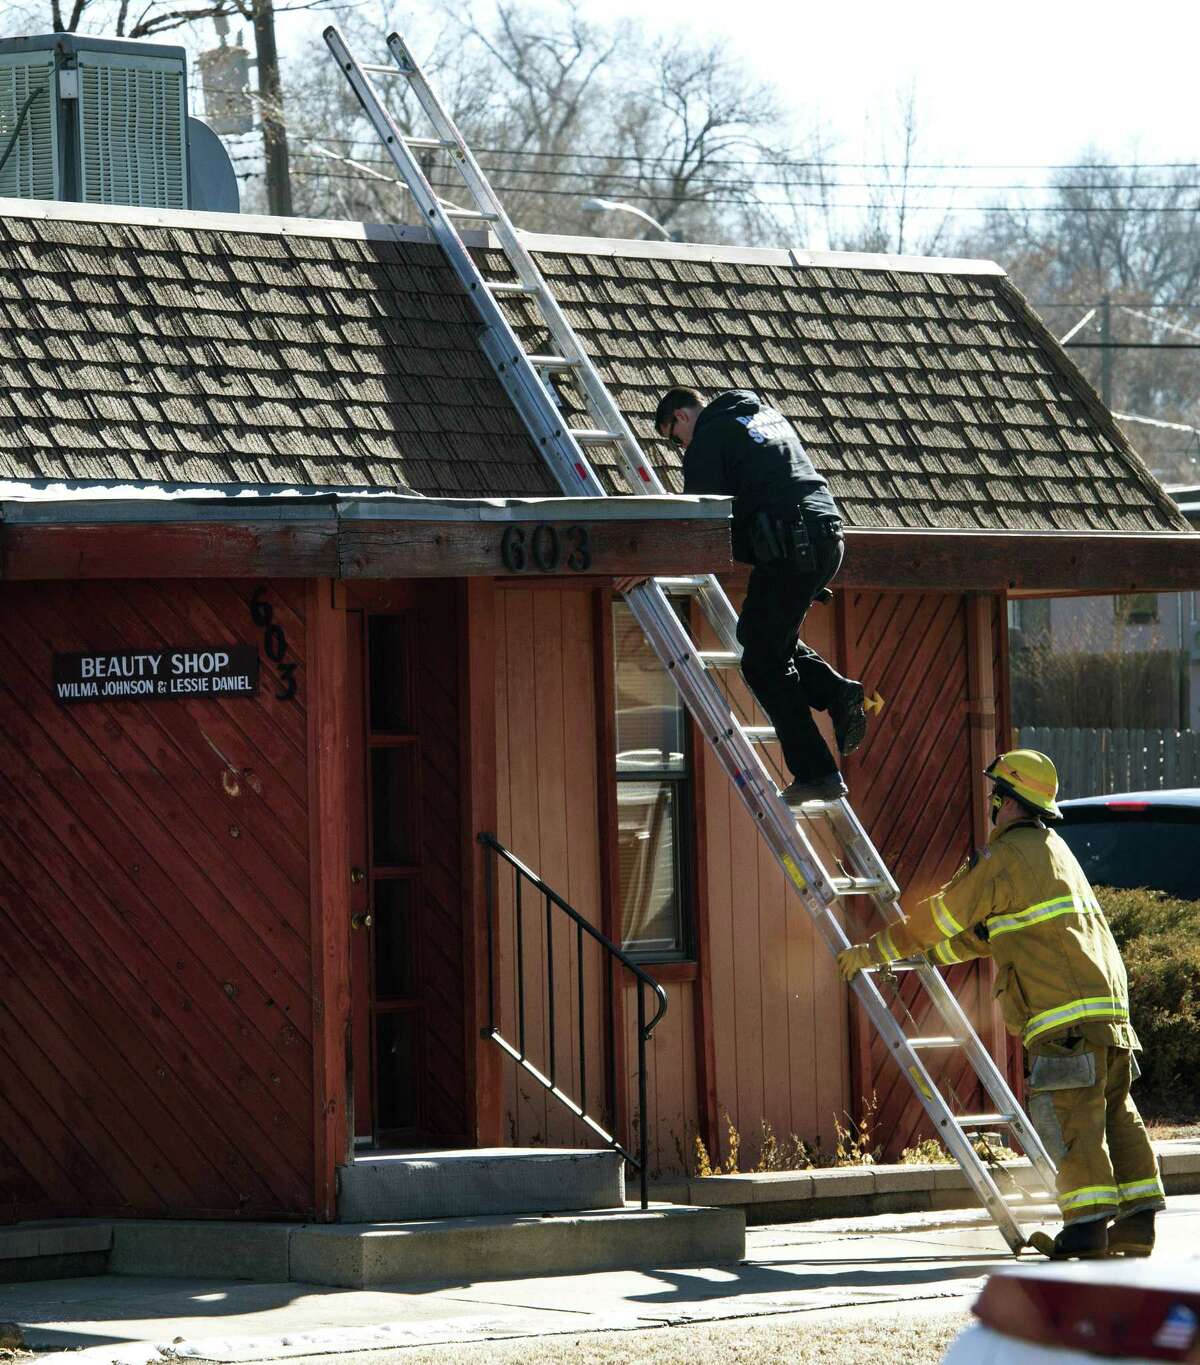 A bomb squad member comes down from the roof as Colorado Springs police officers investigate the scene of an explosion Tuesday, Jan. 6, 2015, at Mr. G’s Hair Salon at 603 S. El Paso Street in Colorado Springs, Colo.